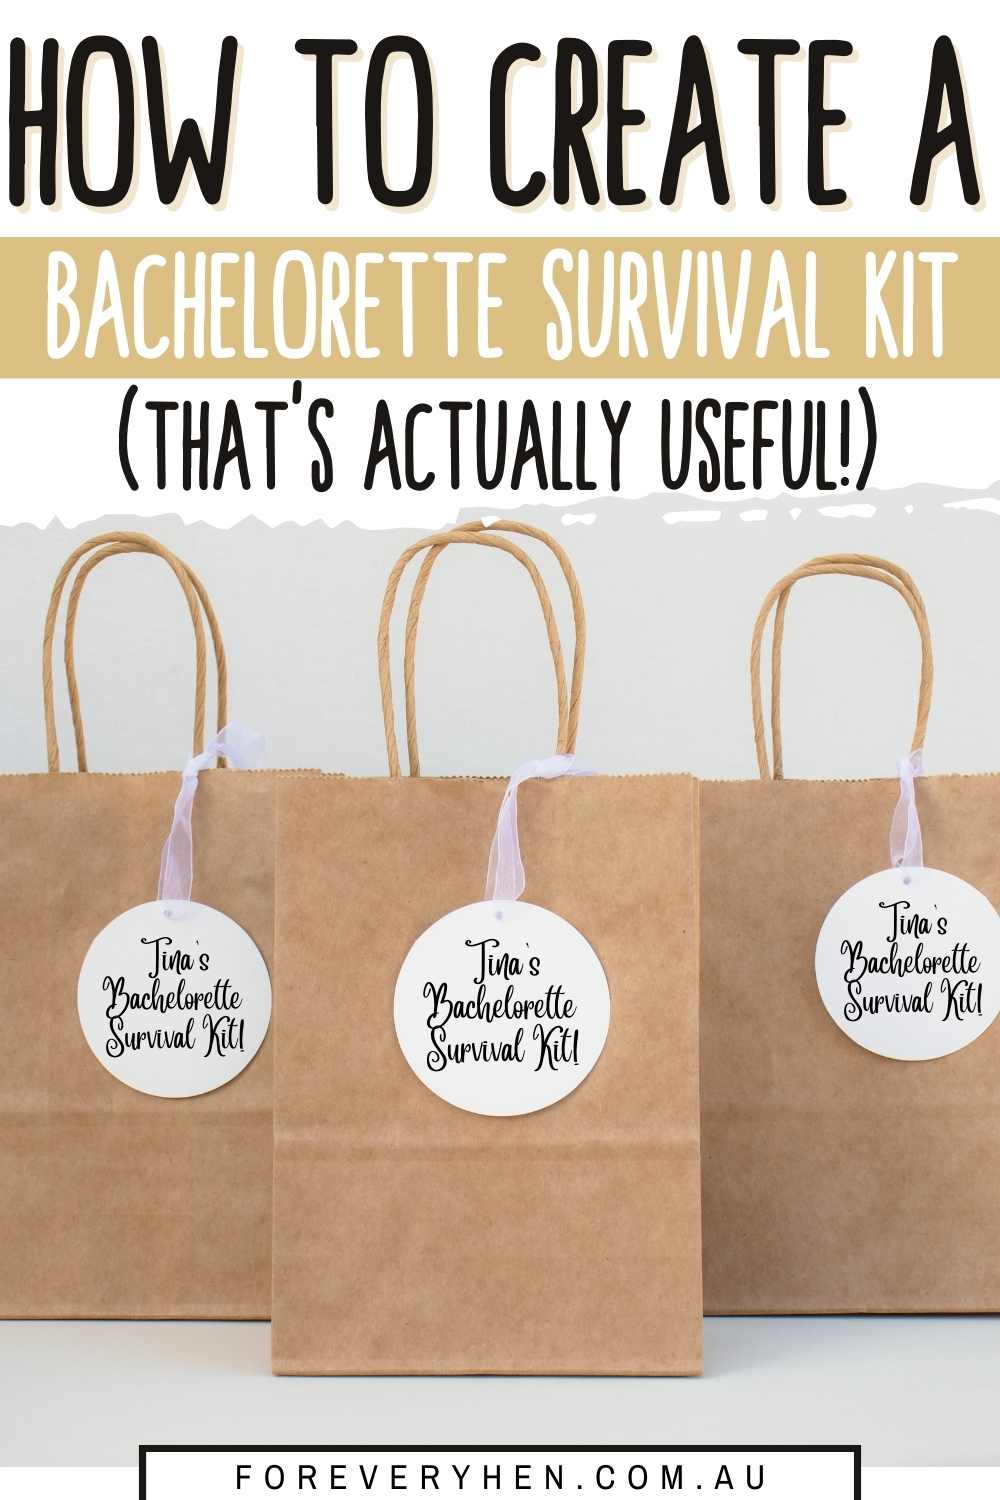 Image of three paper bags labelled 'Tina's Bachelorette Survival Kit!'. Text overlay: How to create a bachelorette survival kit (that's actually useful!)